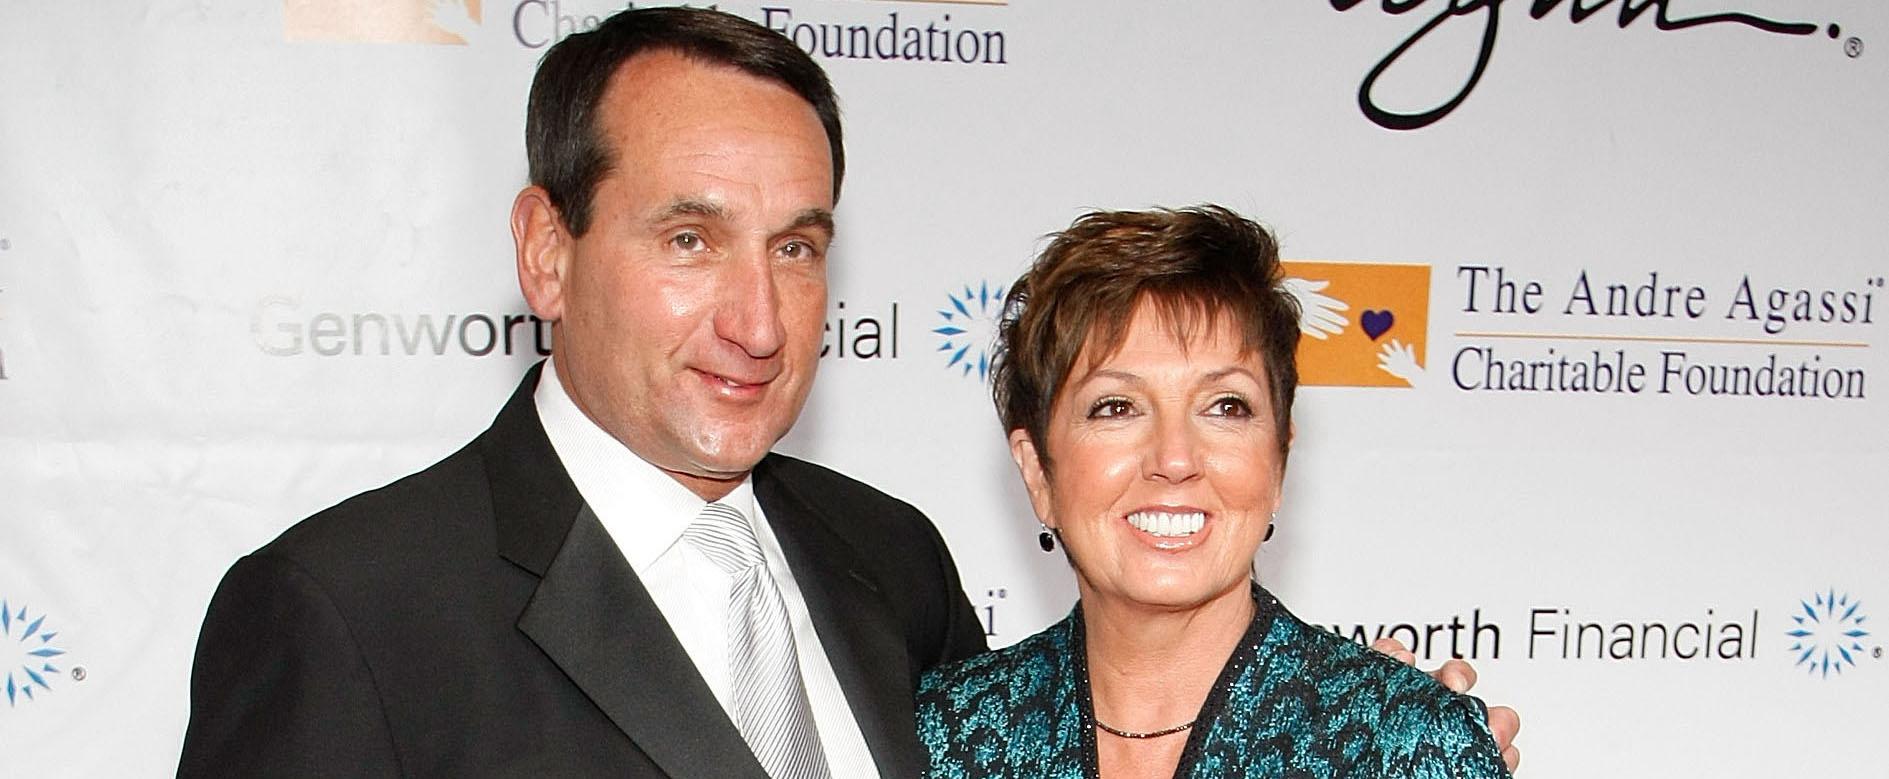 What Is Coach K's Net Worth? When Is His Last Game? Here's What We Know